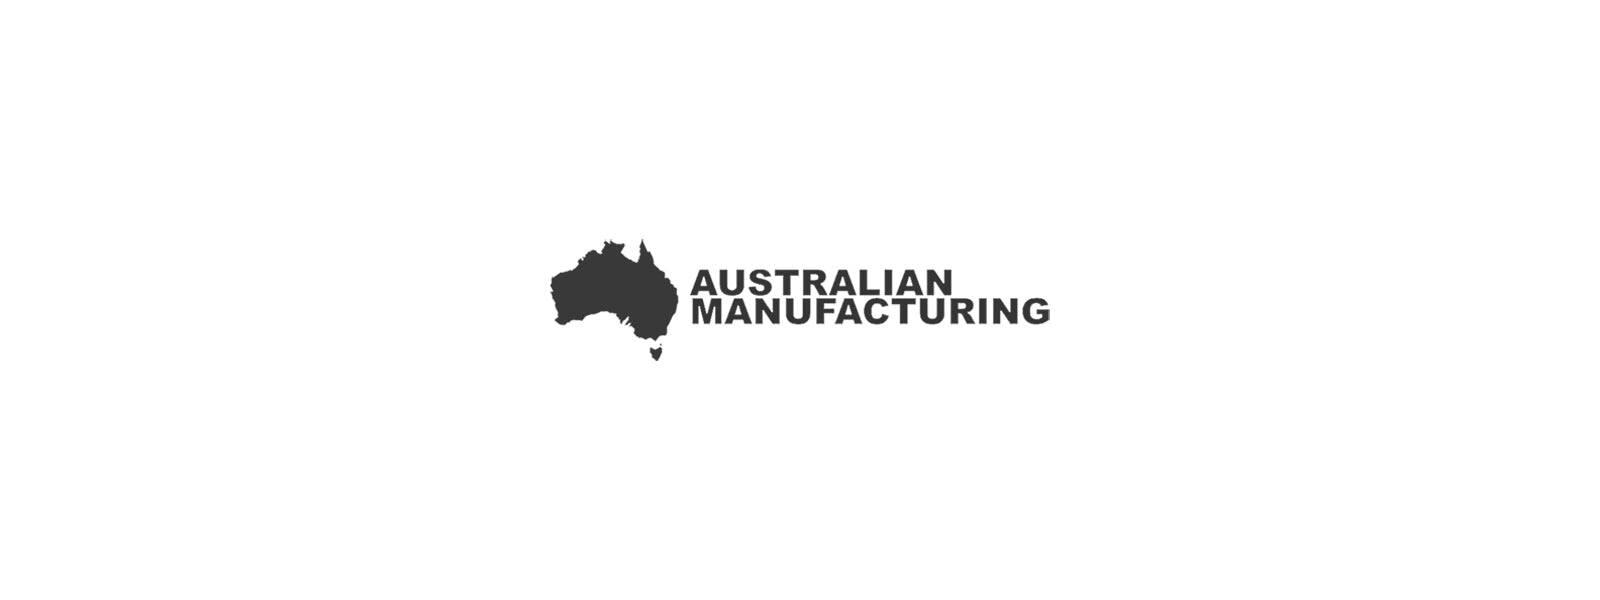 Byron skincare company to build world-class HQ with $460K govt funding │ Australian Manufacturing